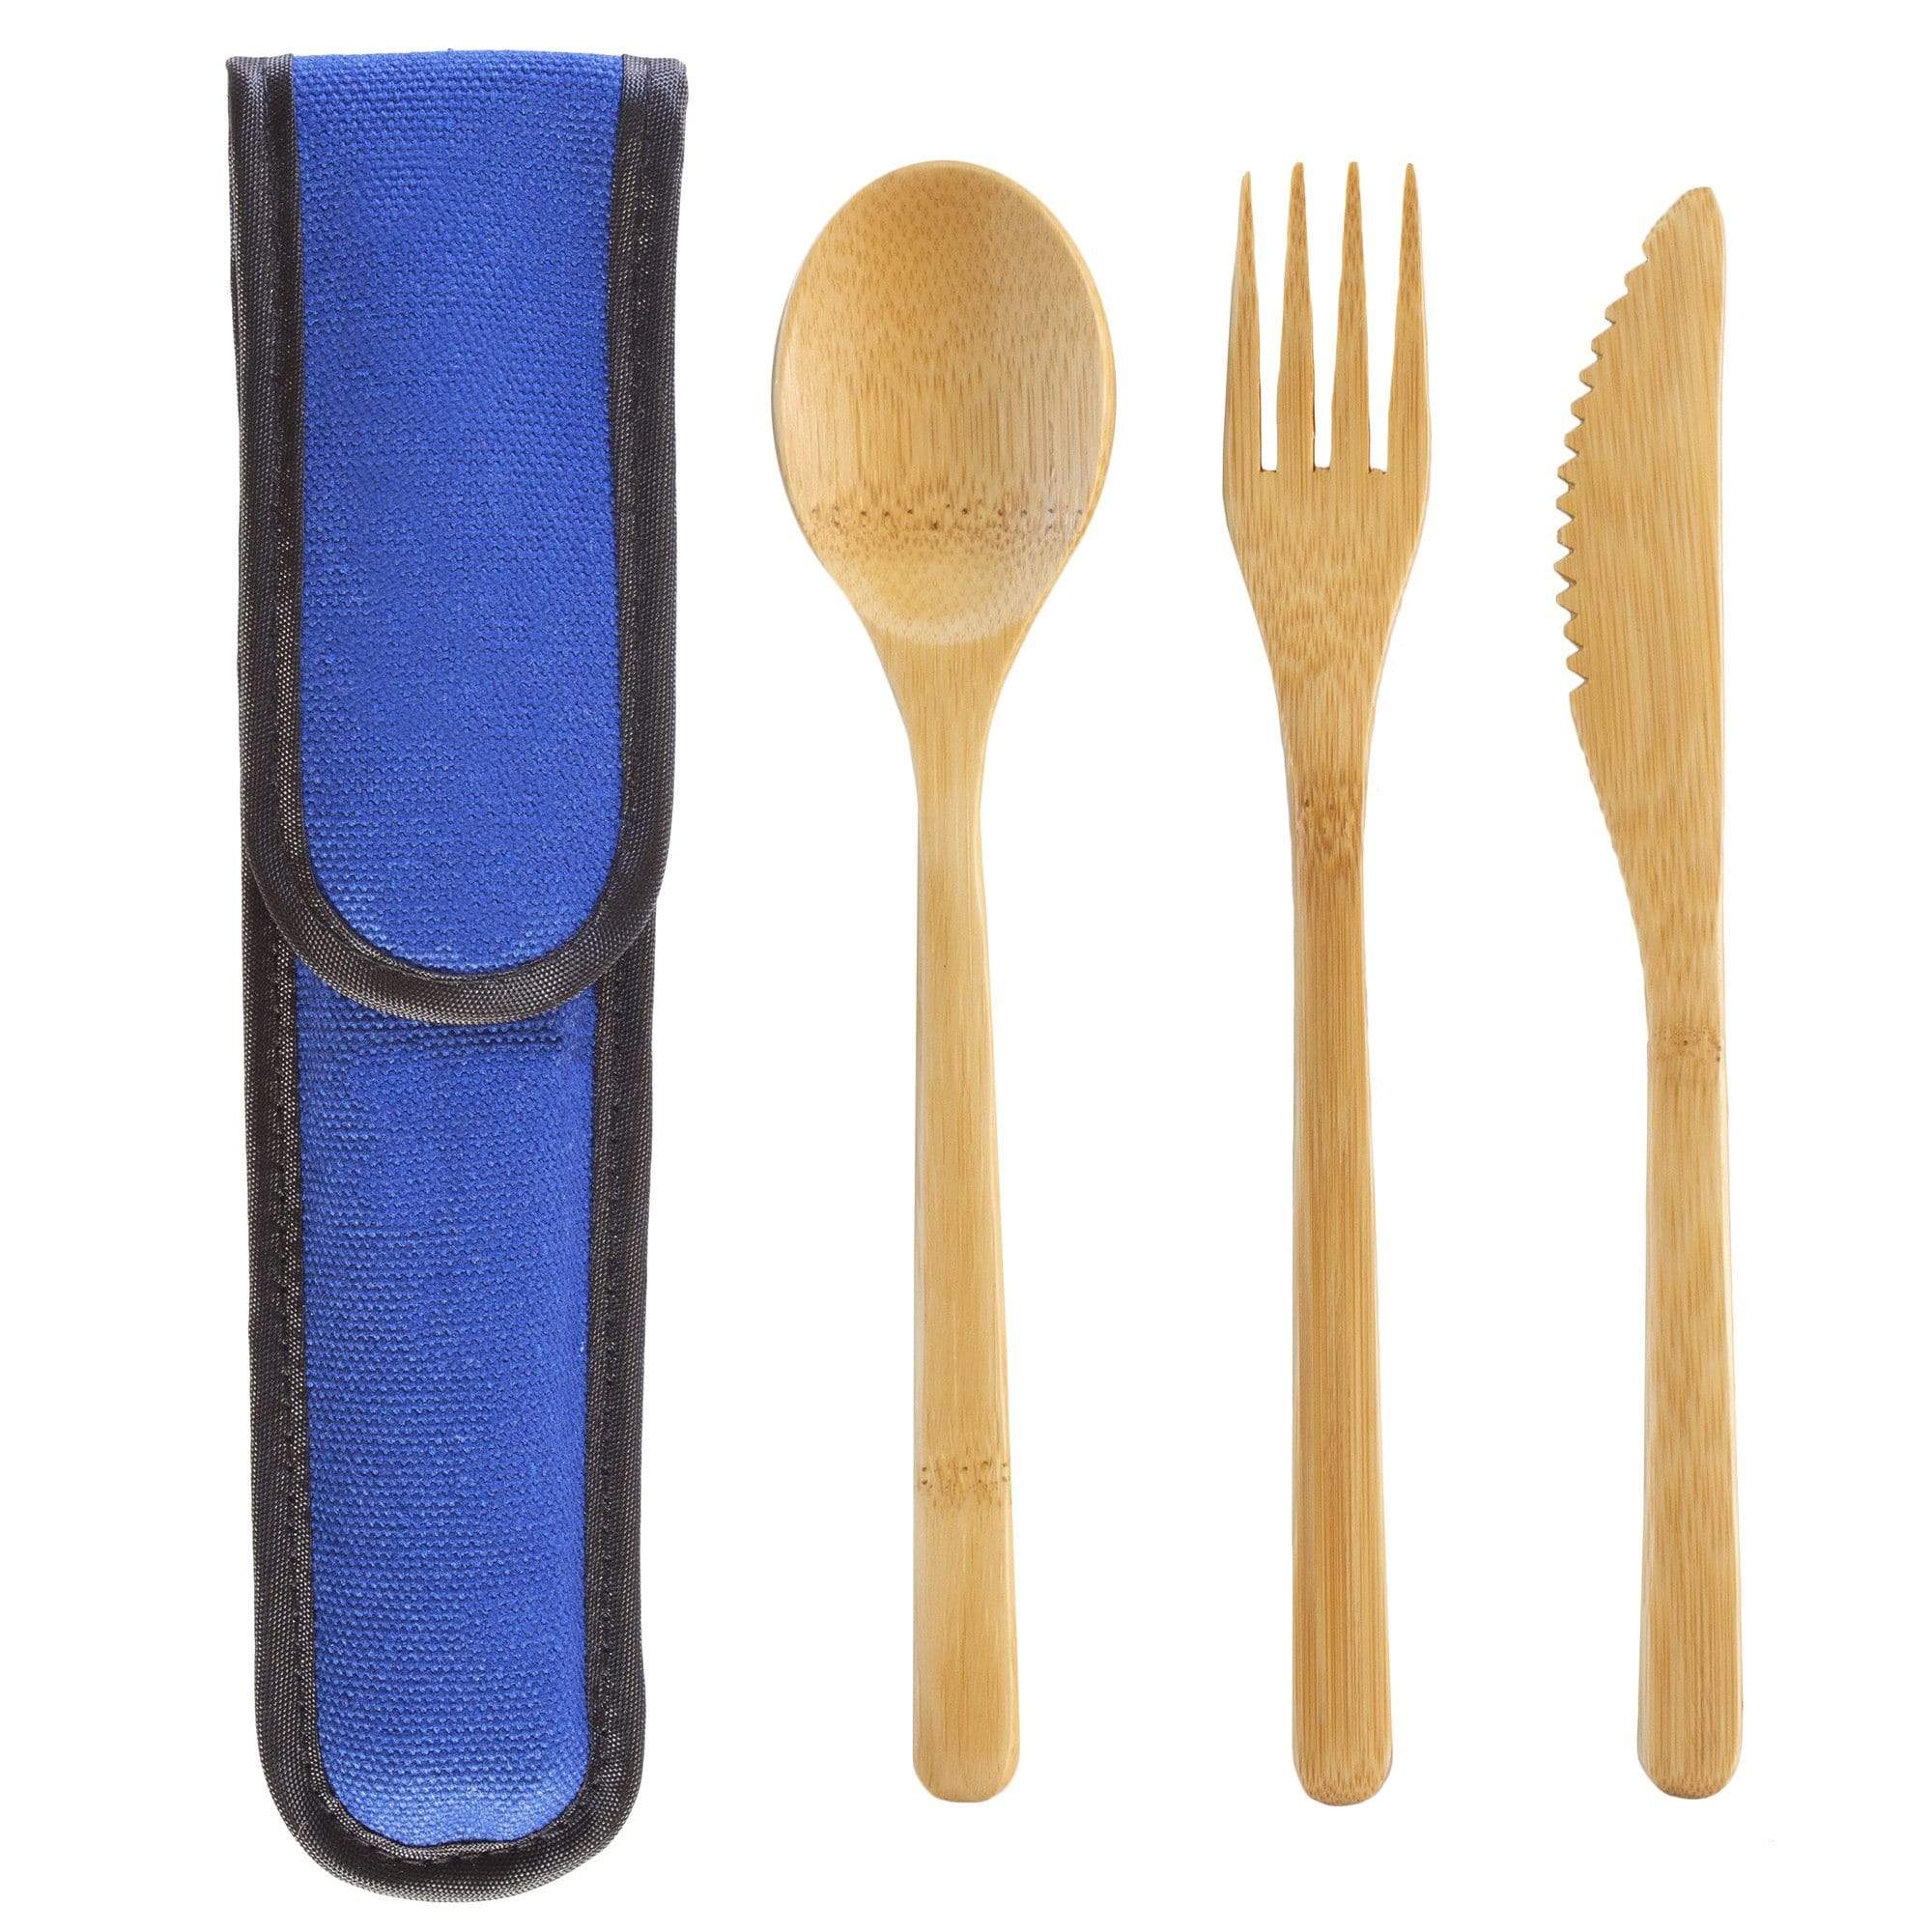 https://totallybamboo.com/cdn/shop/products/totally-bamboo-take-along-reusable-utensil-set-with-blue-travel-case-includes-bamboo-spoon-fork-knife-dishwasher-safe-totally-bamboo-633734.jpg?v=1627999818